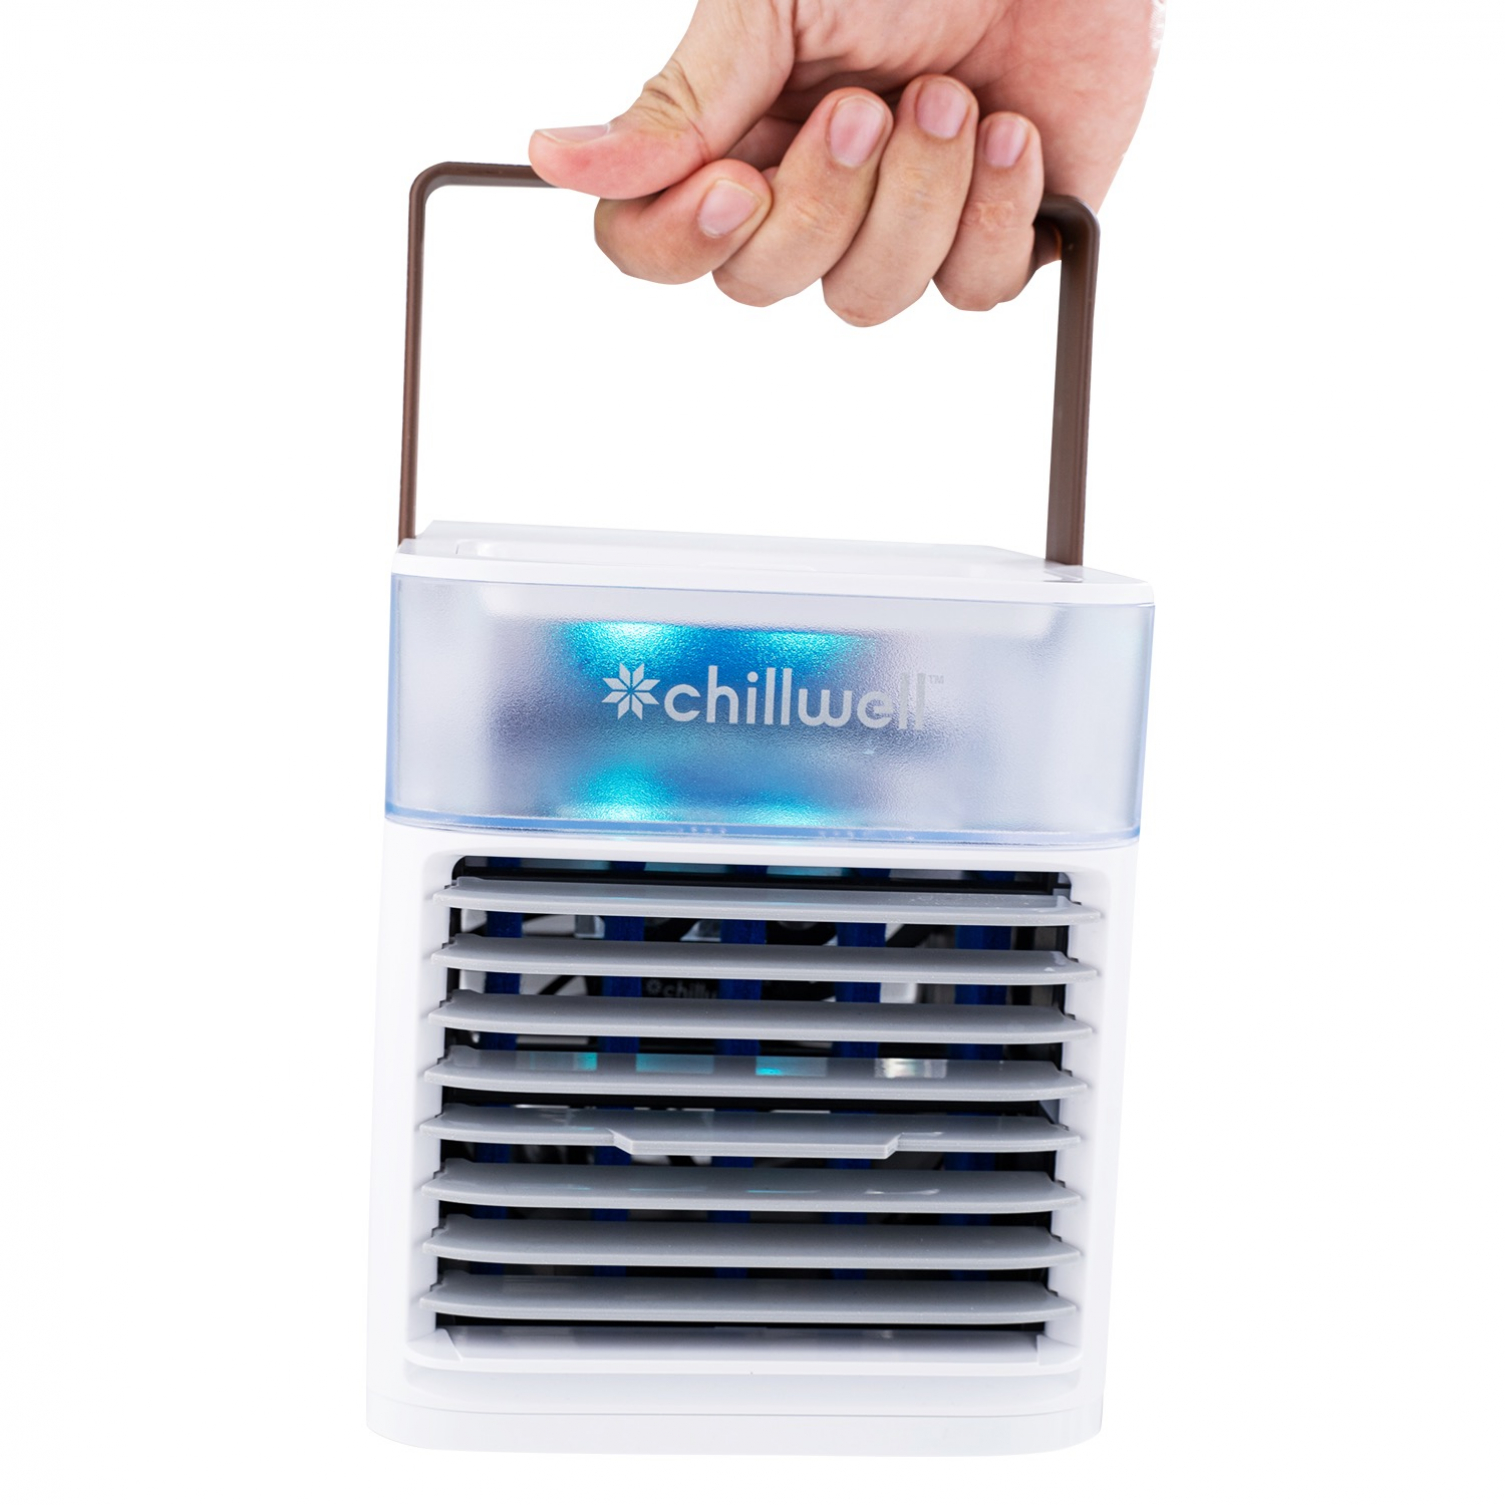 Chillwell AC Lowest Price